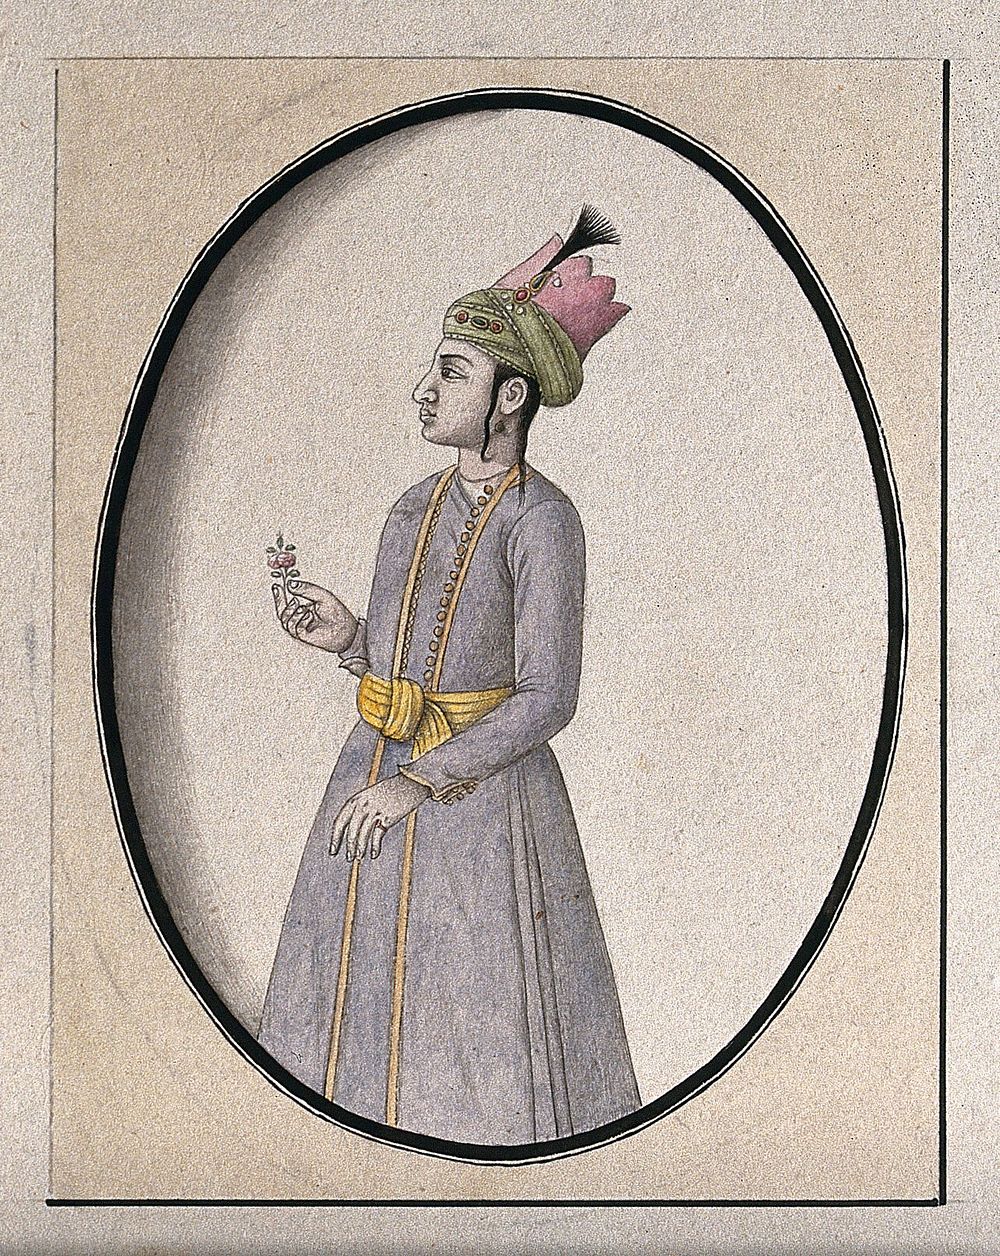 Wazir of the Abdalli king of Kabul, Ahmad Shah. Watercolour drawing by an Indian artist.